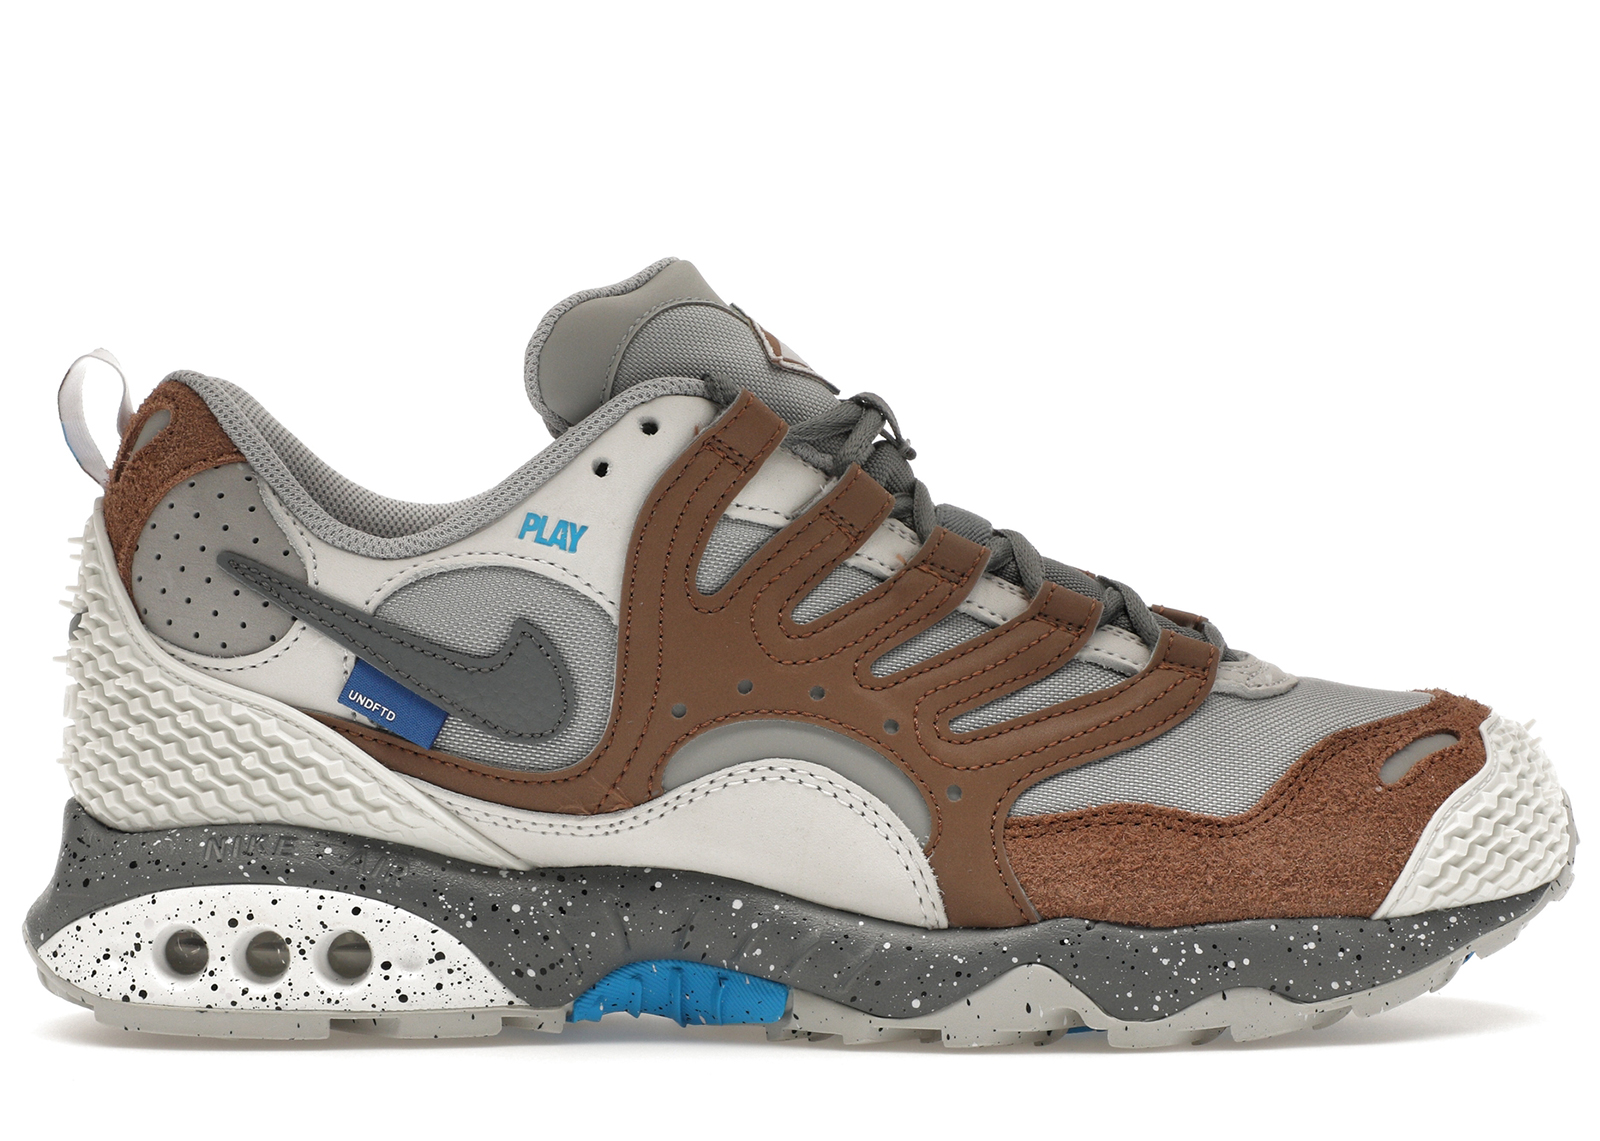 Nike Air Terra Humara Undefeated Archaeo Brown Hombre 